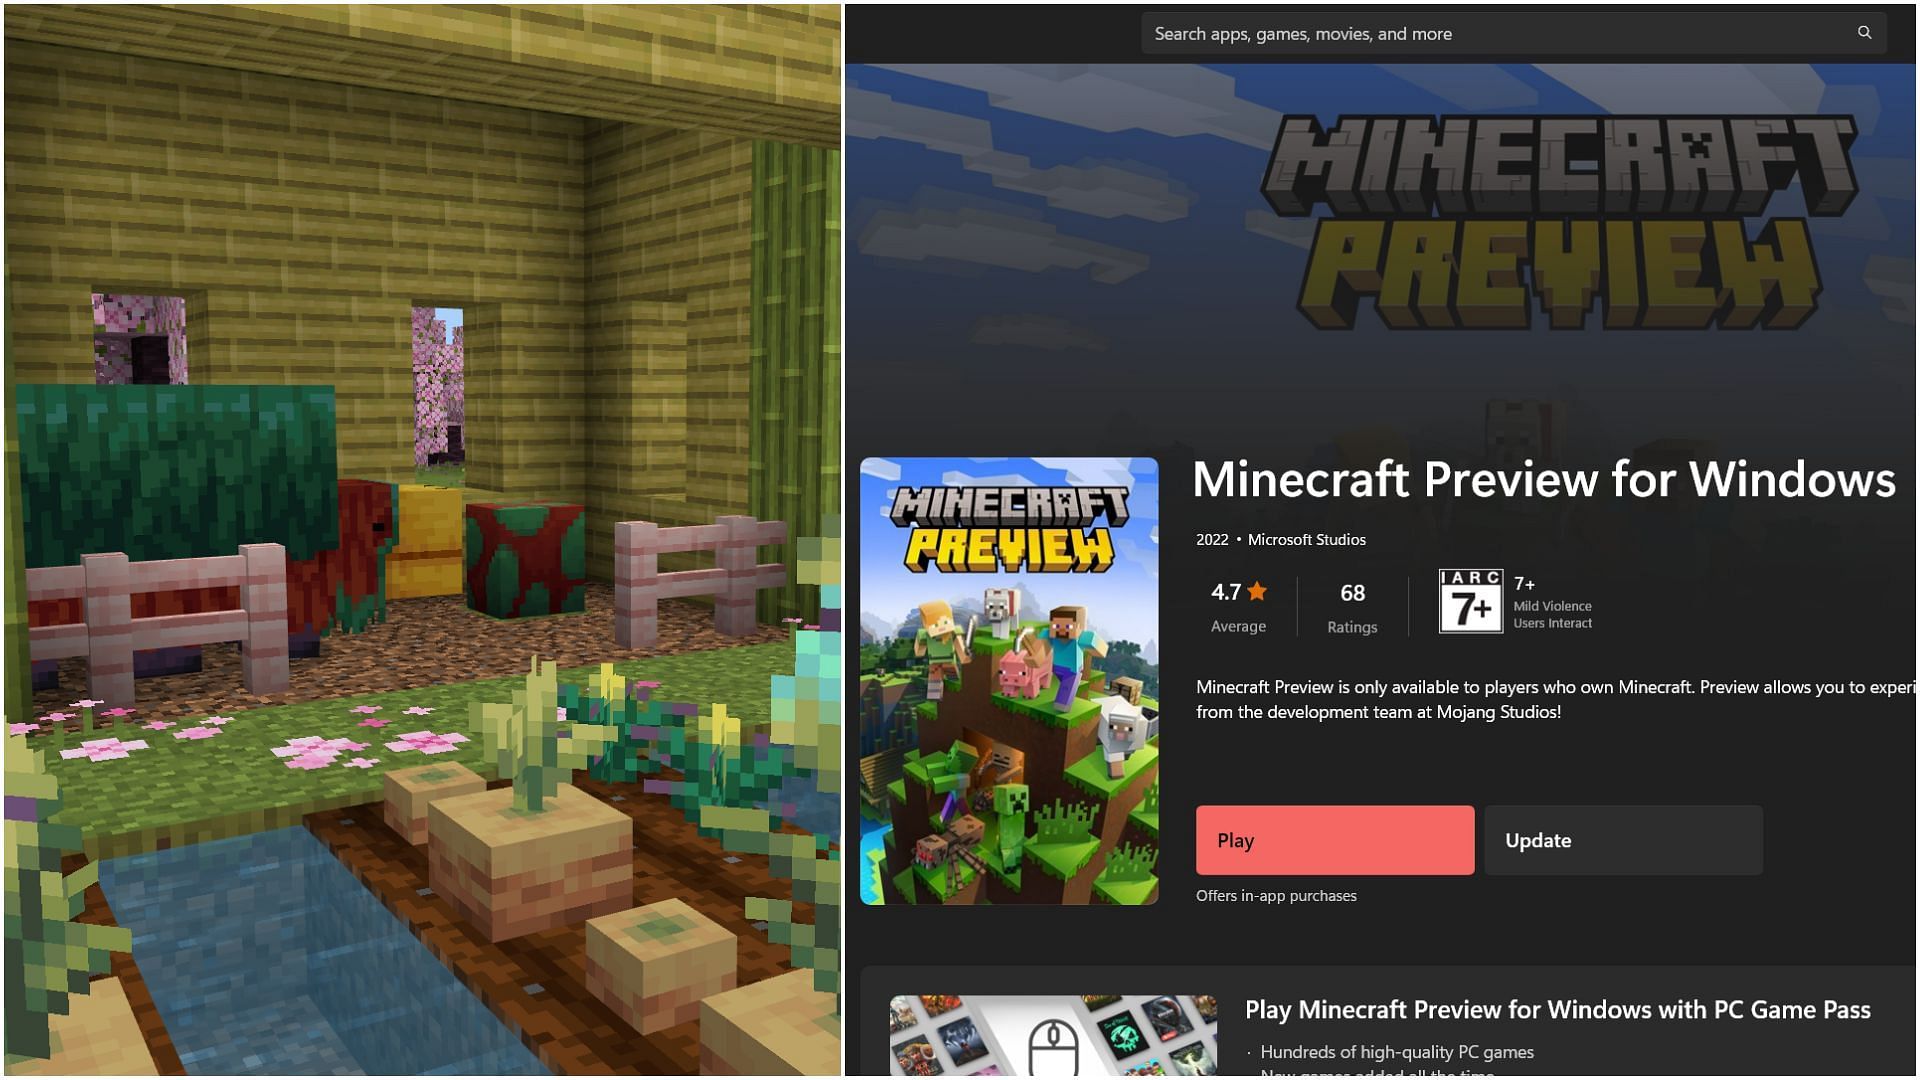 Players can easily download the latest Minecraft Bedrock beta/preview 1.20.0.23 (Image via Sportskeeda)